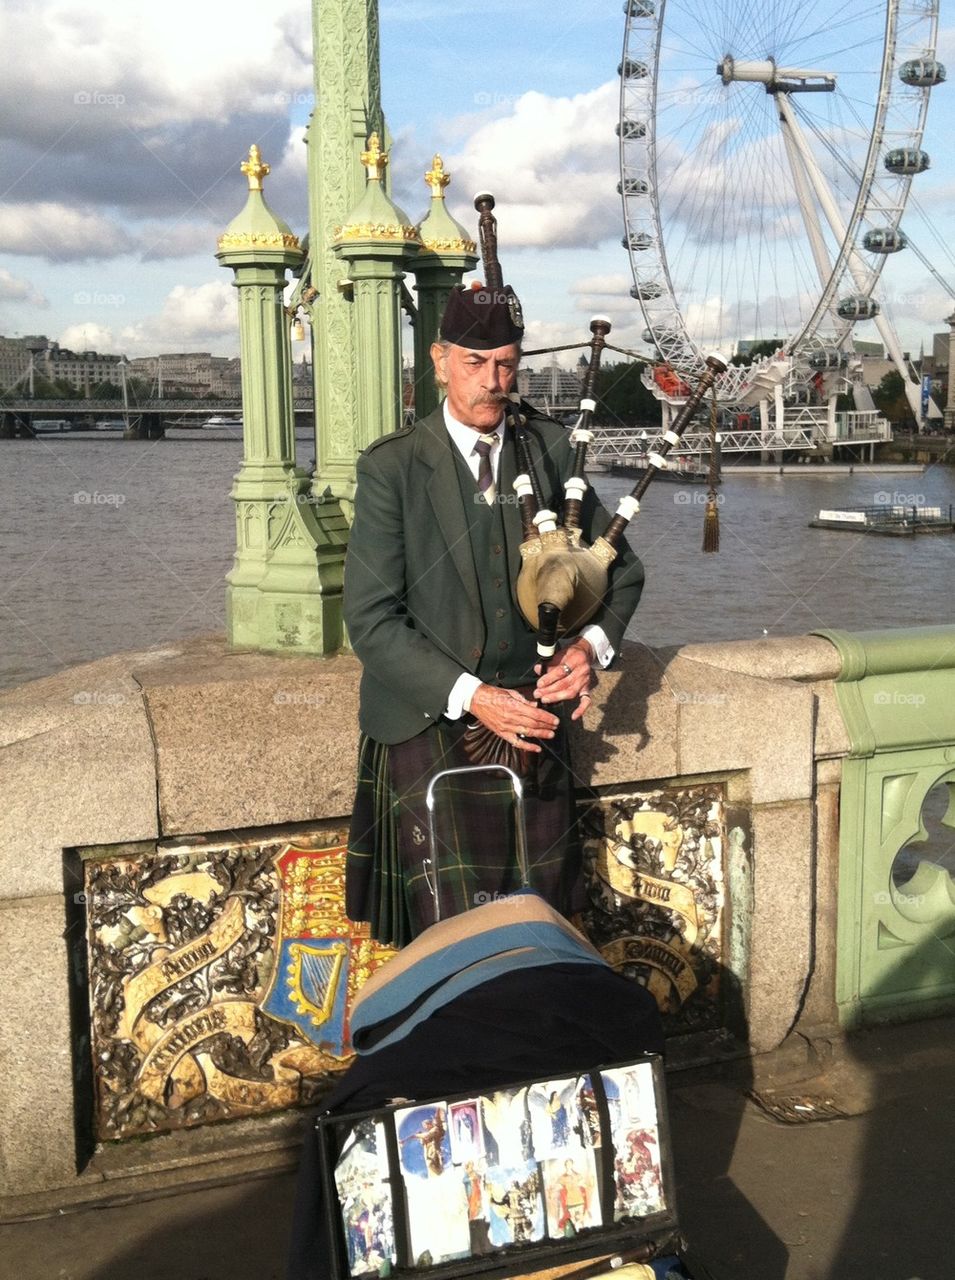 Bagpipes in London